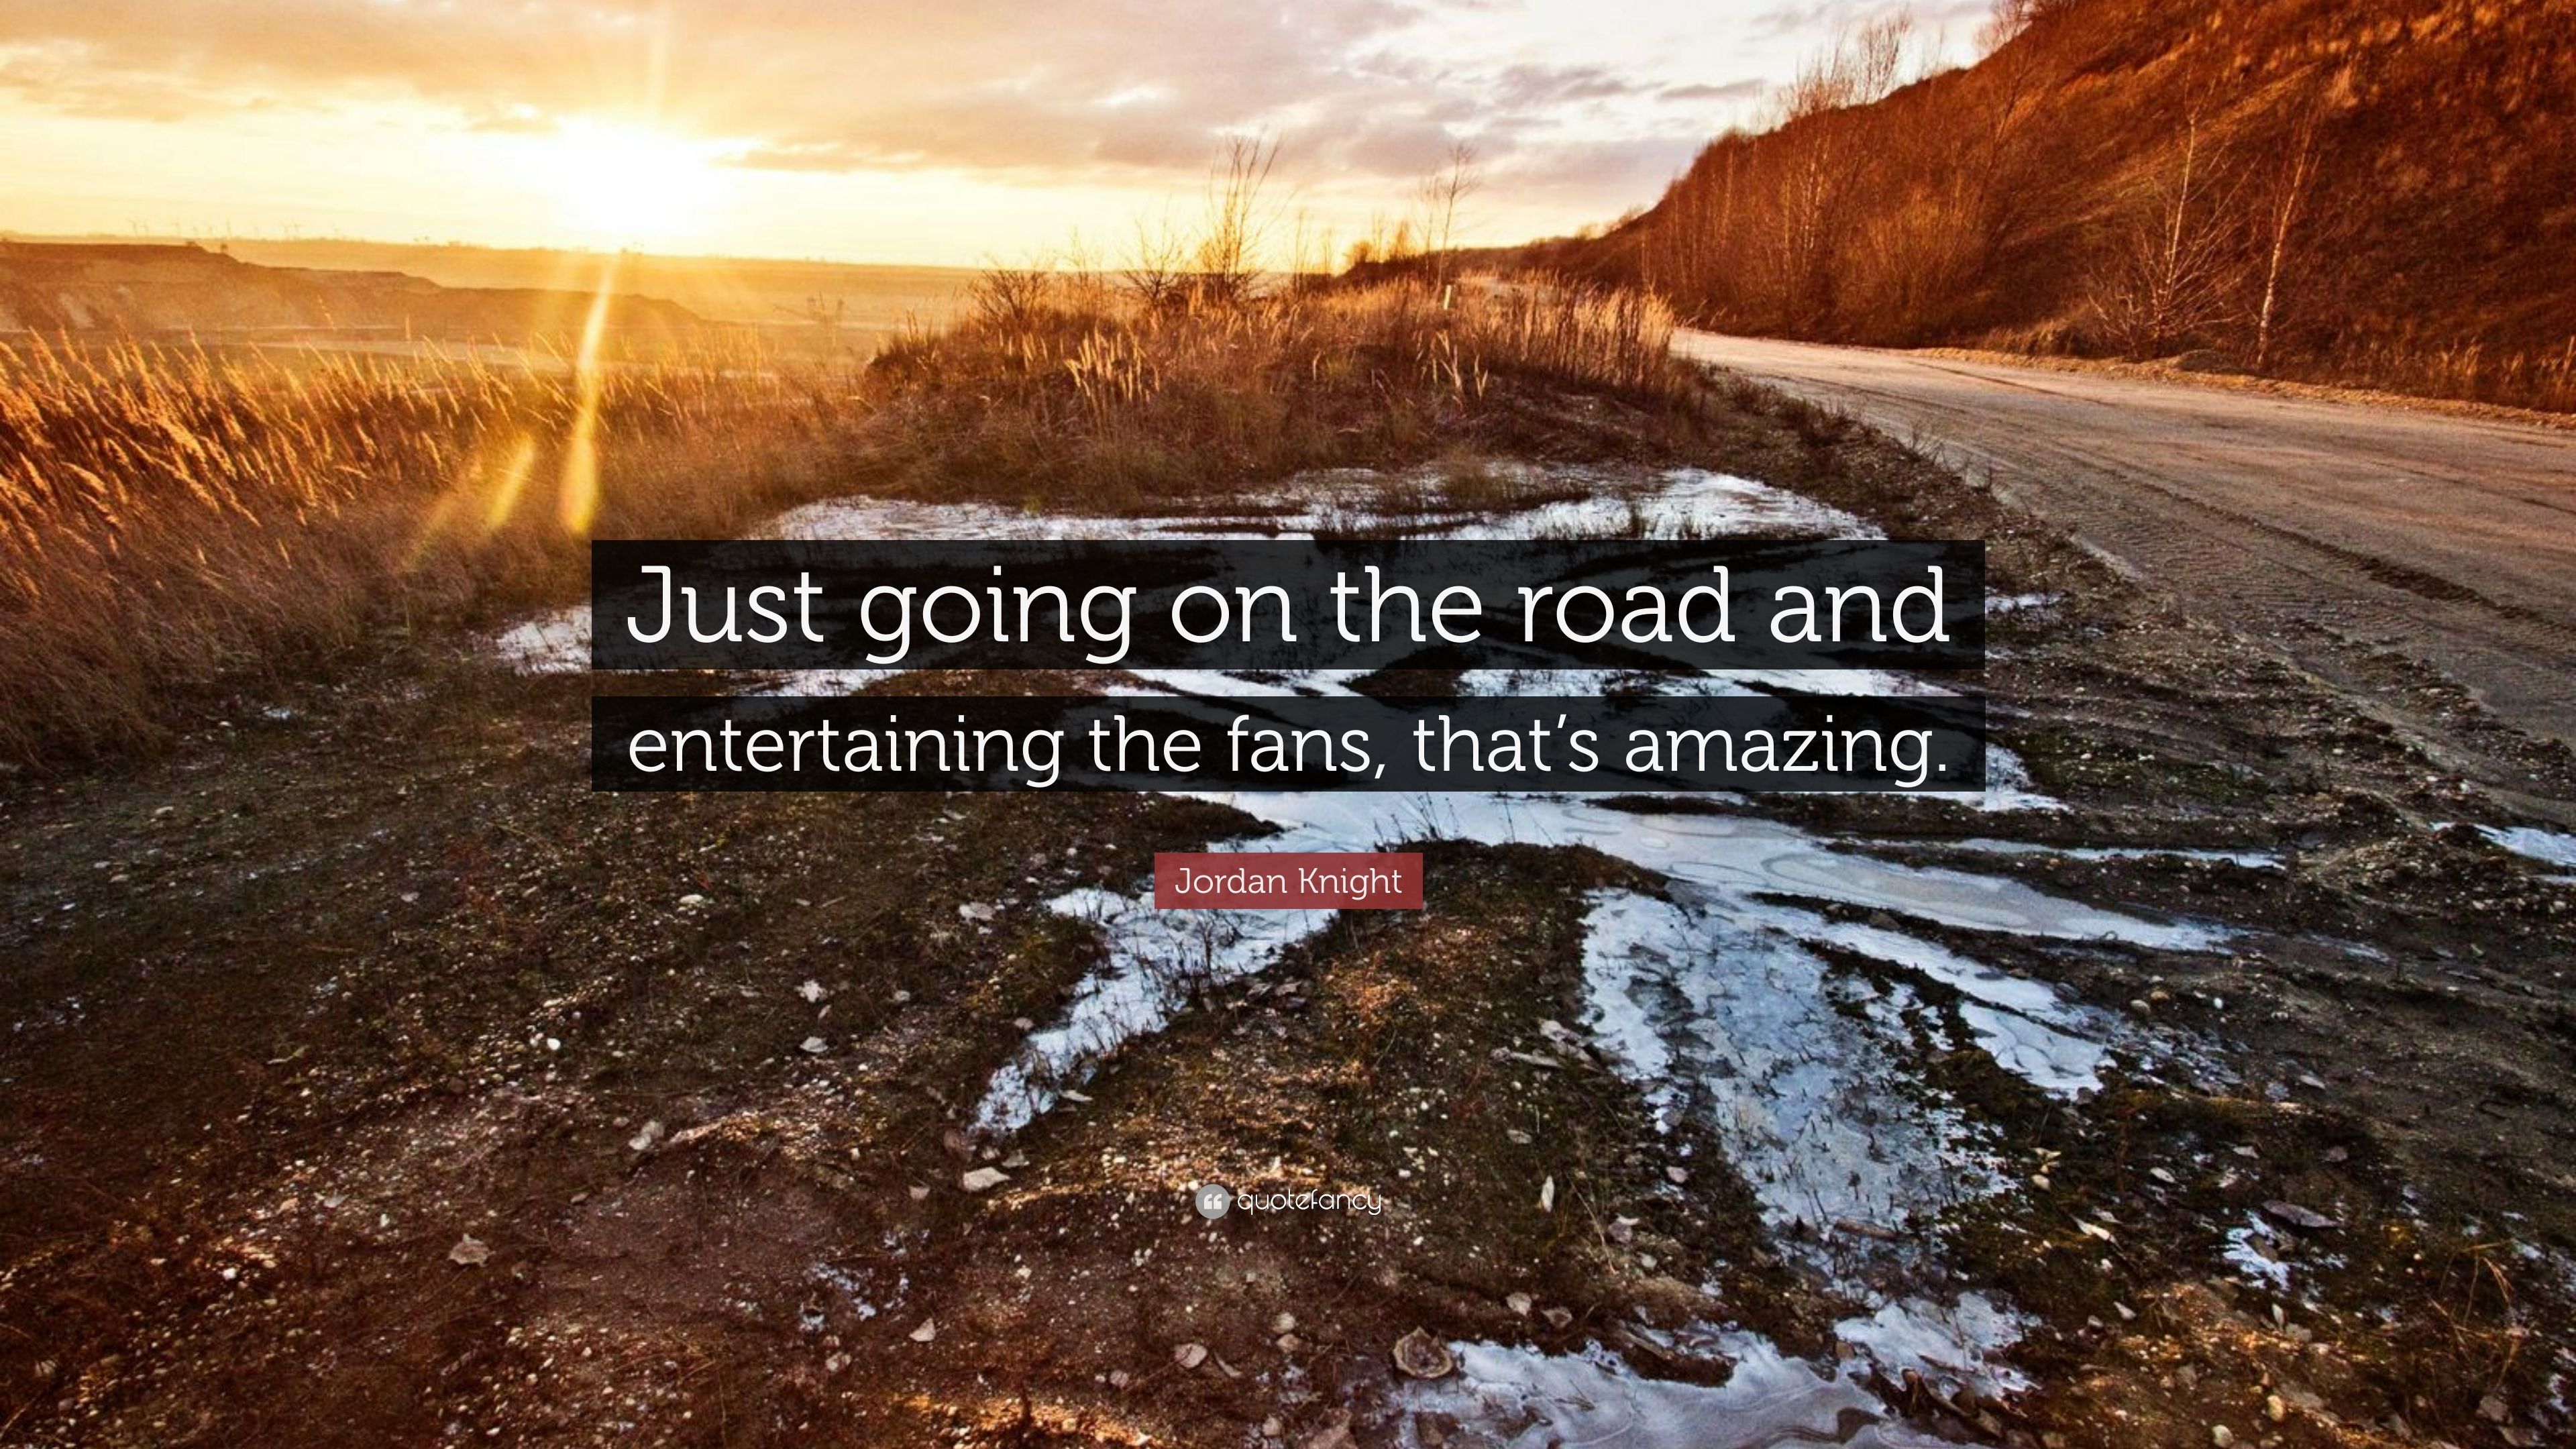 Jordan Knight Quote: “Just going on the road and entertaining